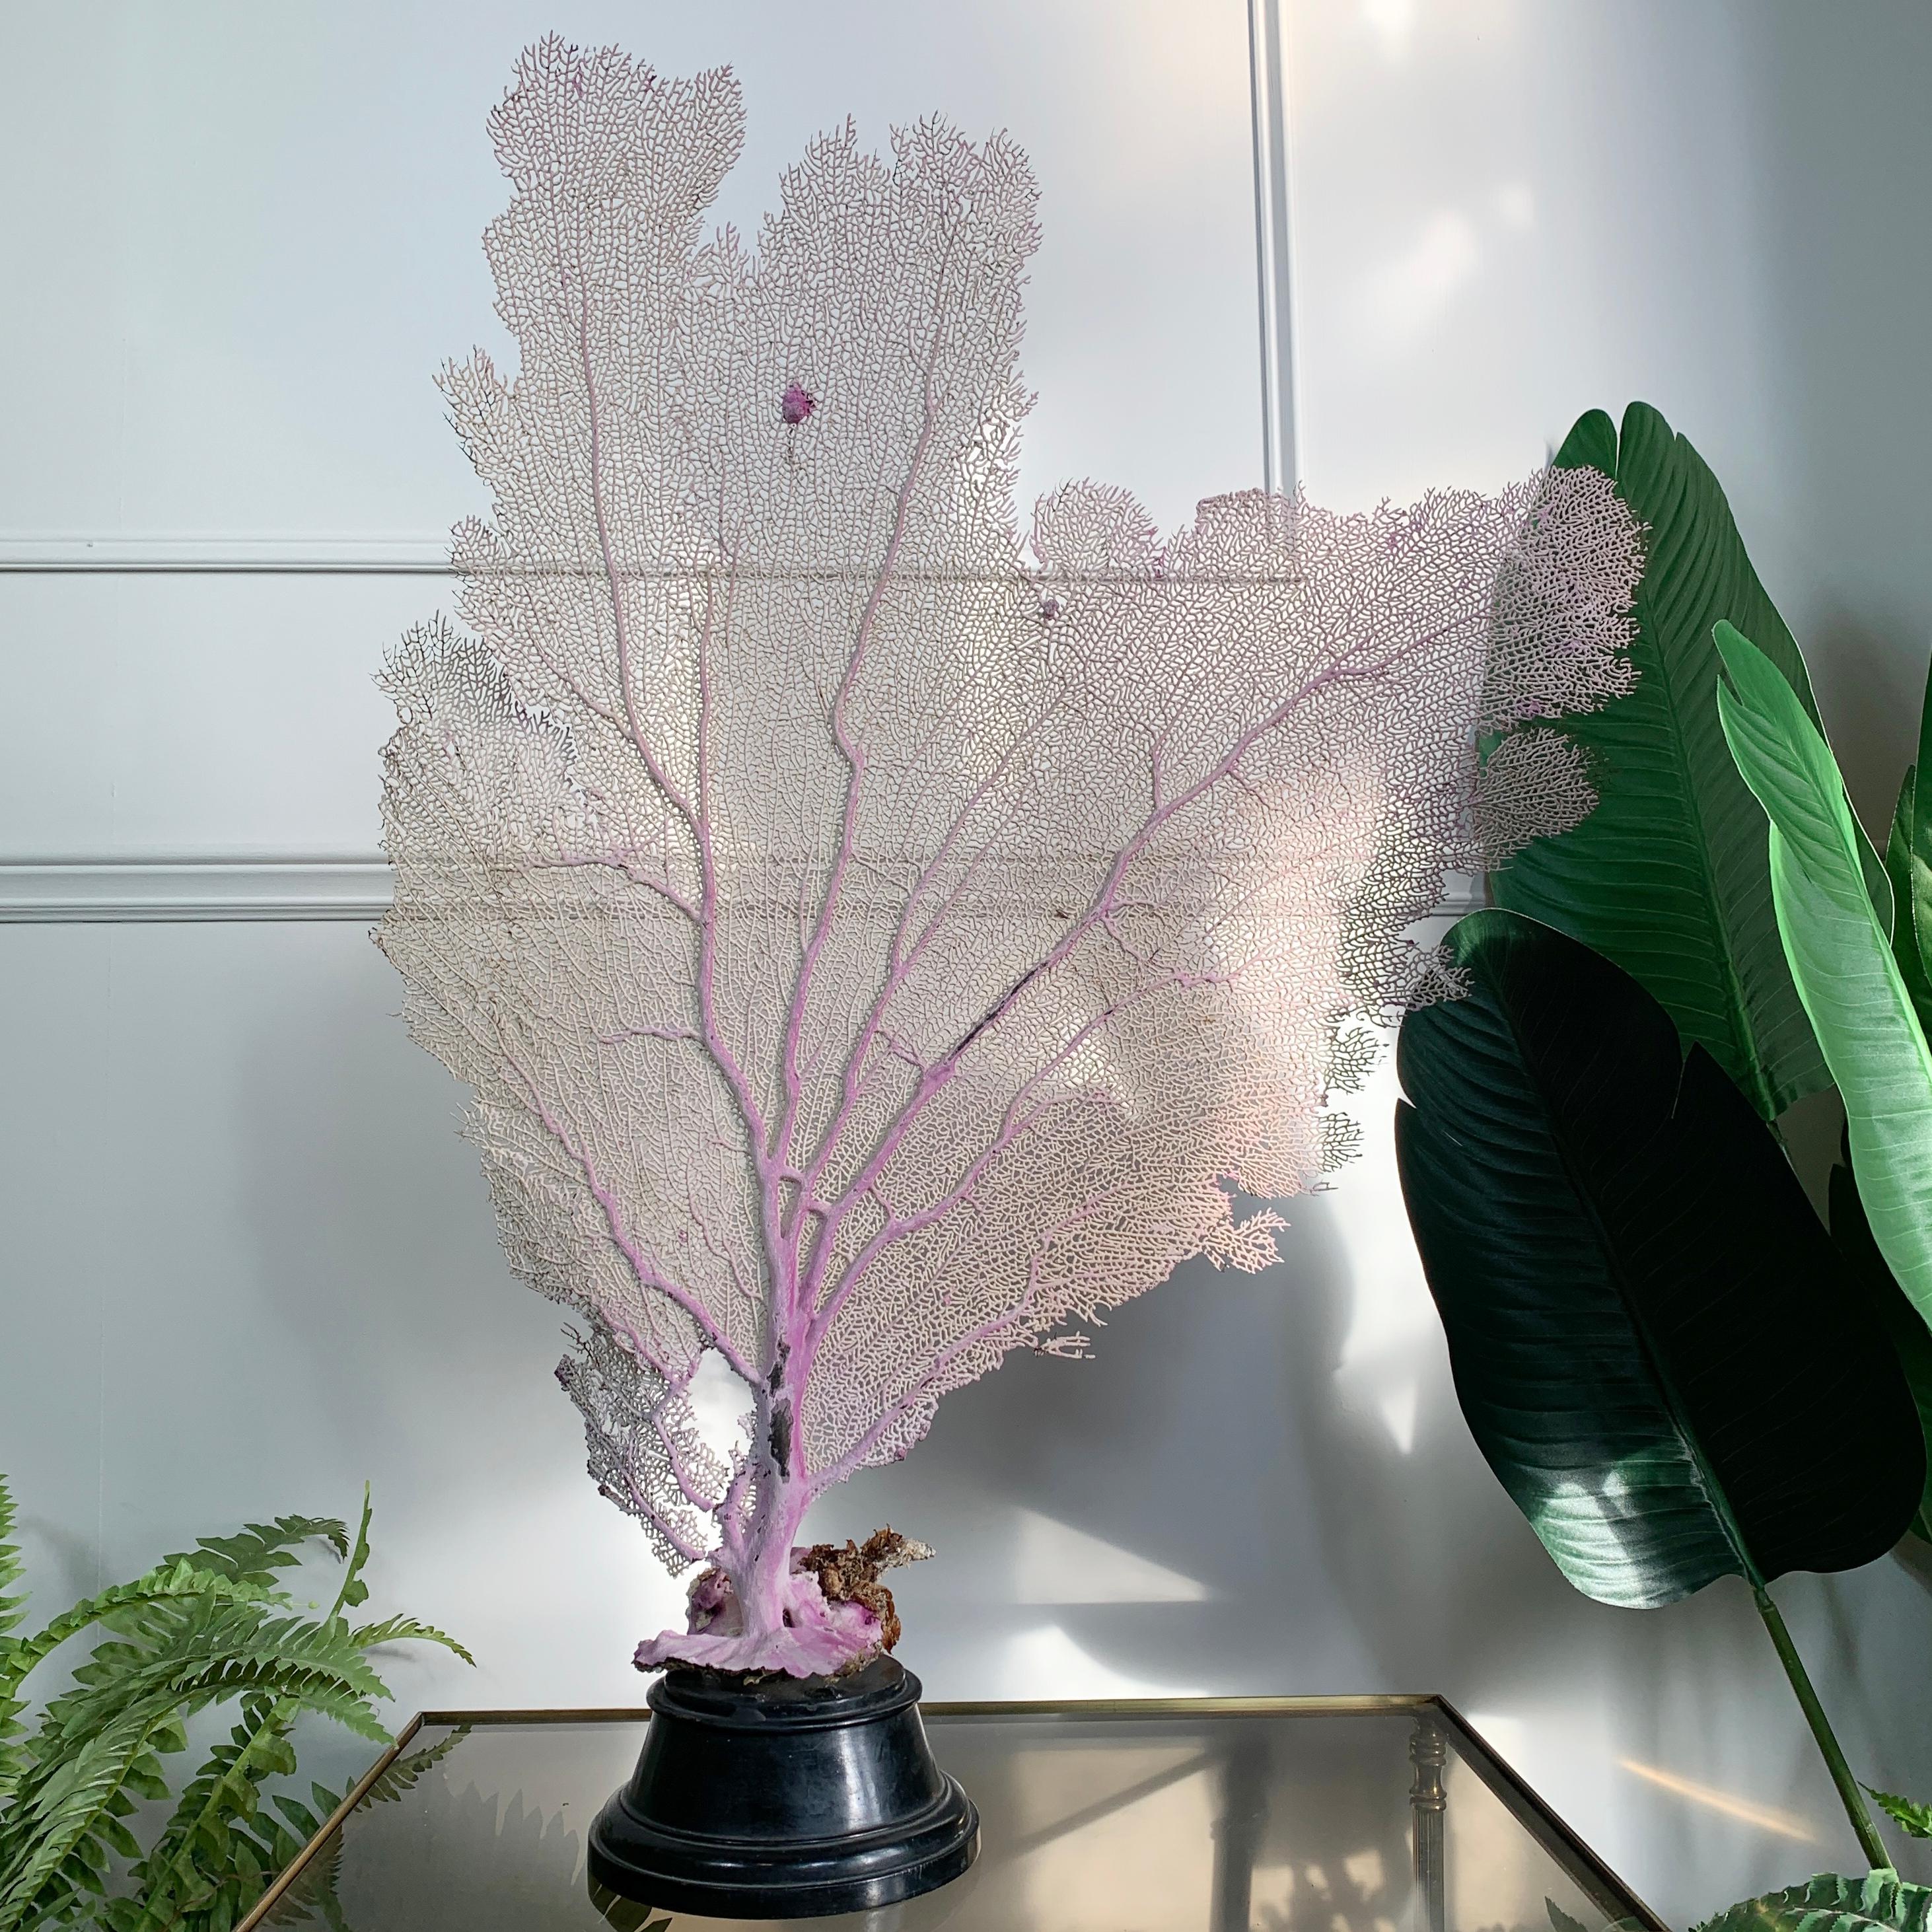 THIS CORAL CAN ONLY BE SHIPPED INSIDE THE UK, NO INTERNATIONAL SHIPPING DUE TO RESTRICTIONS

Beautiful large natural vintage sea fan coral
Soft pinky / purple color 
The coral is mounted on an antique ebonised wooden base.

Measures: 
76cm